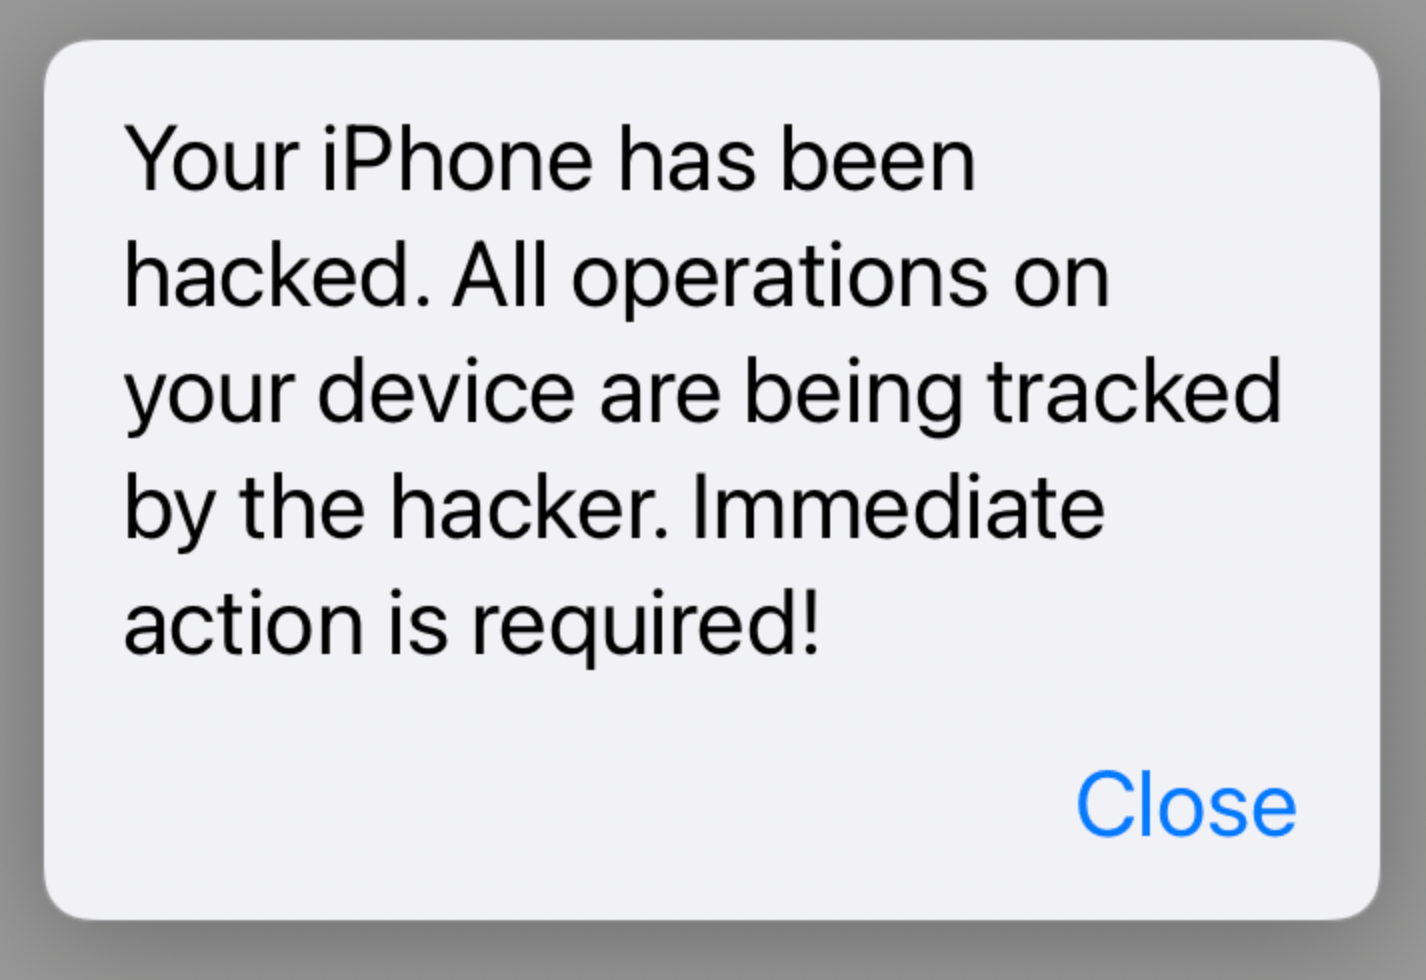 iPhone hacked message